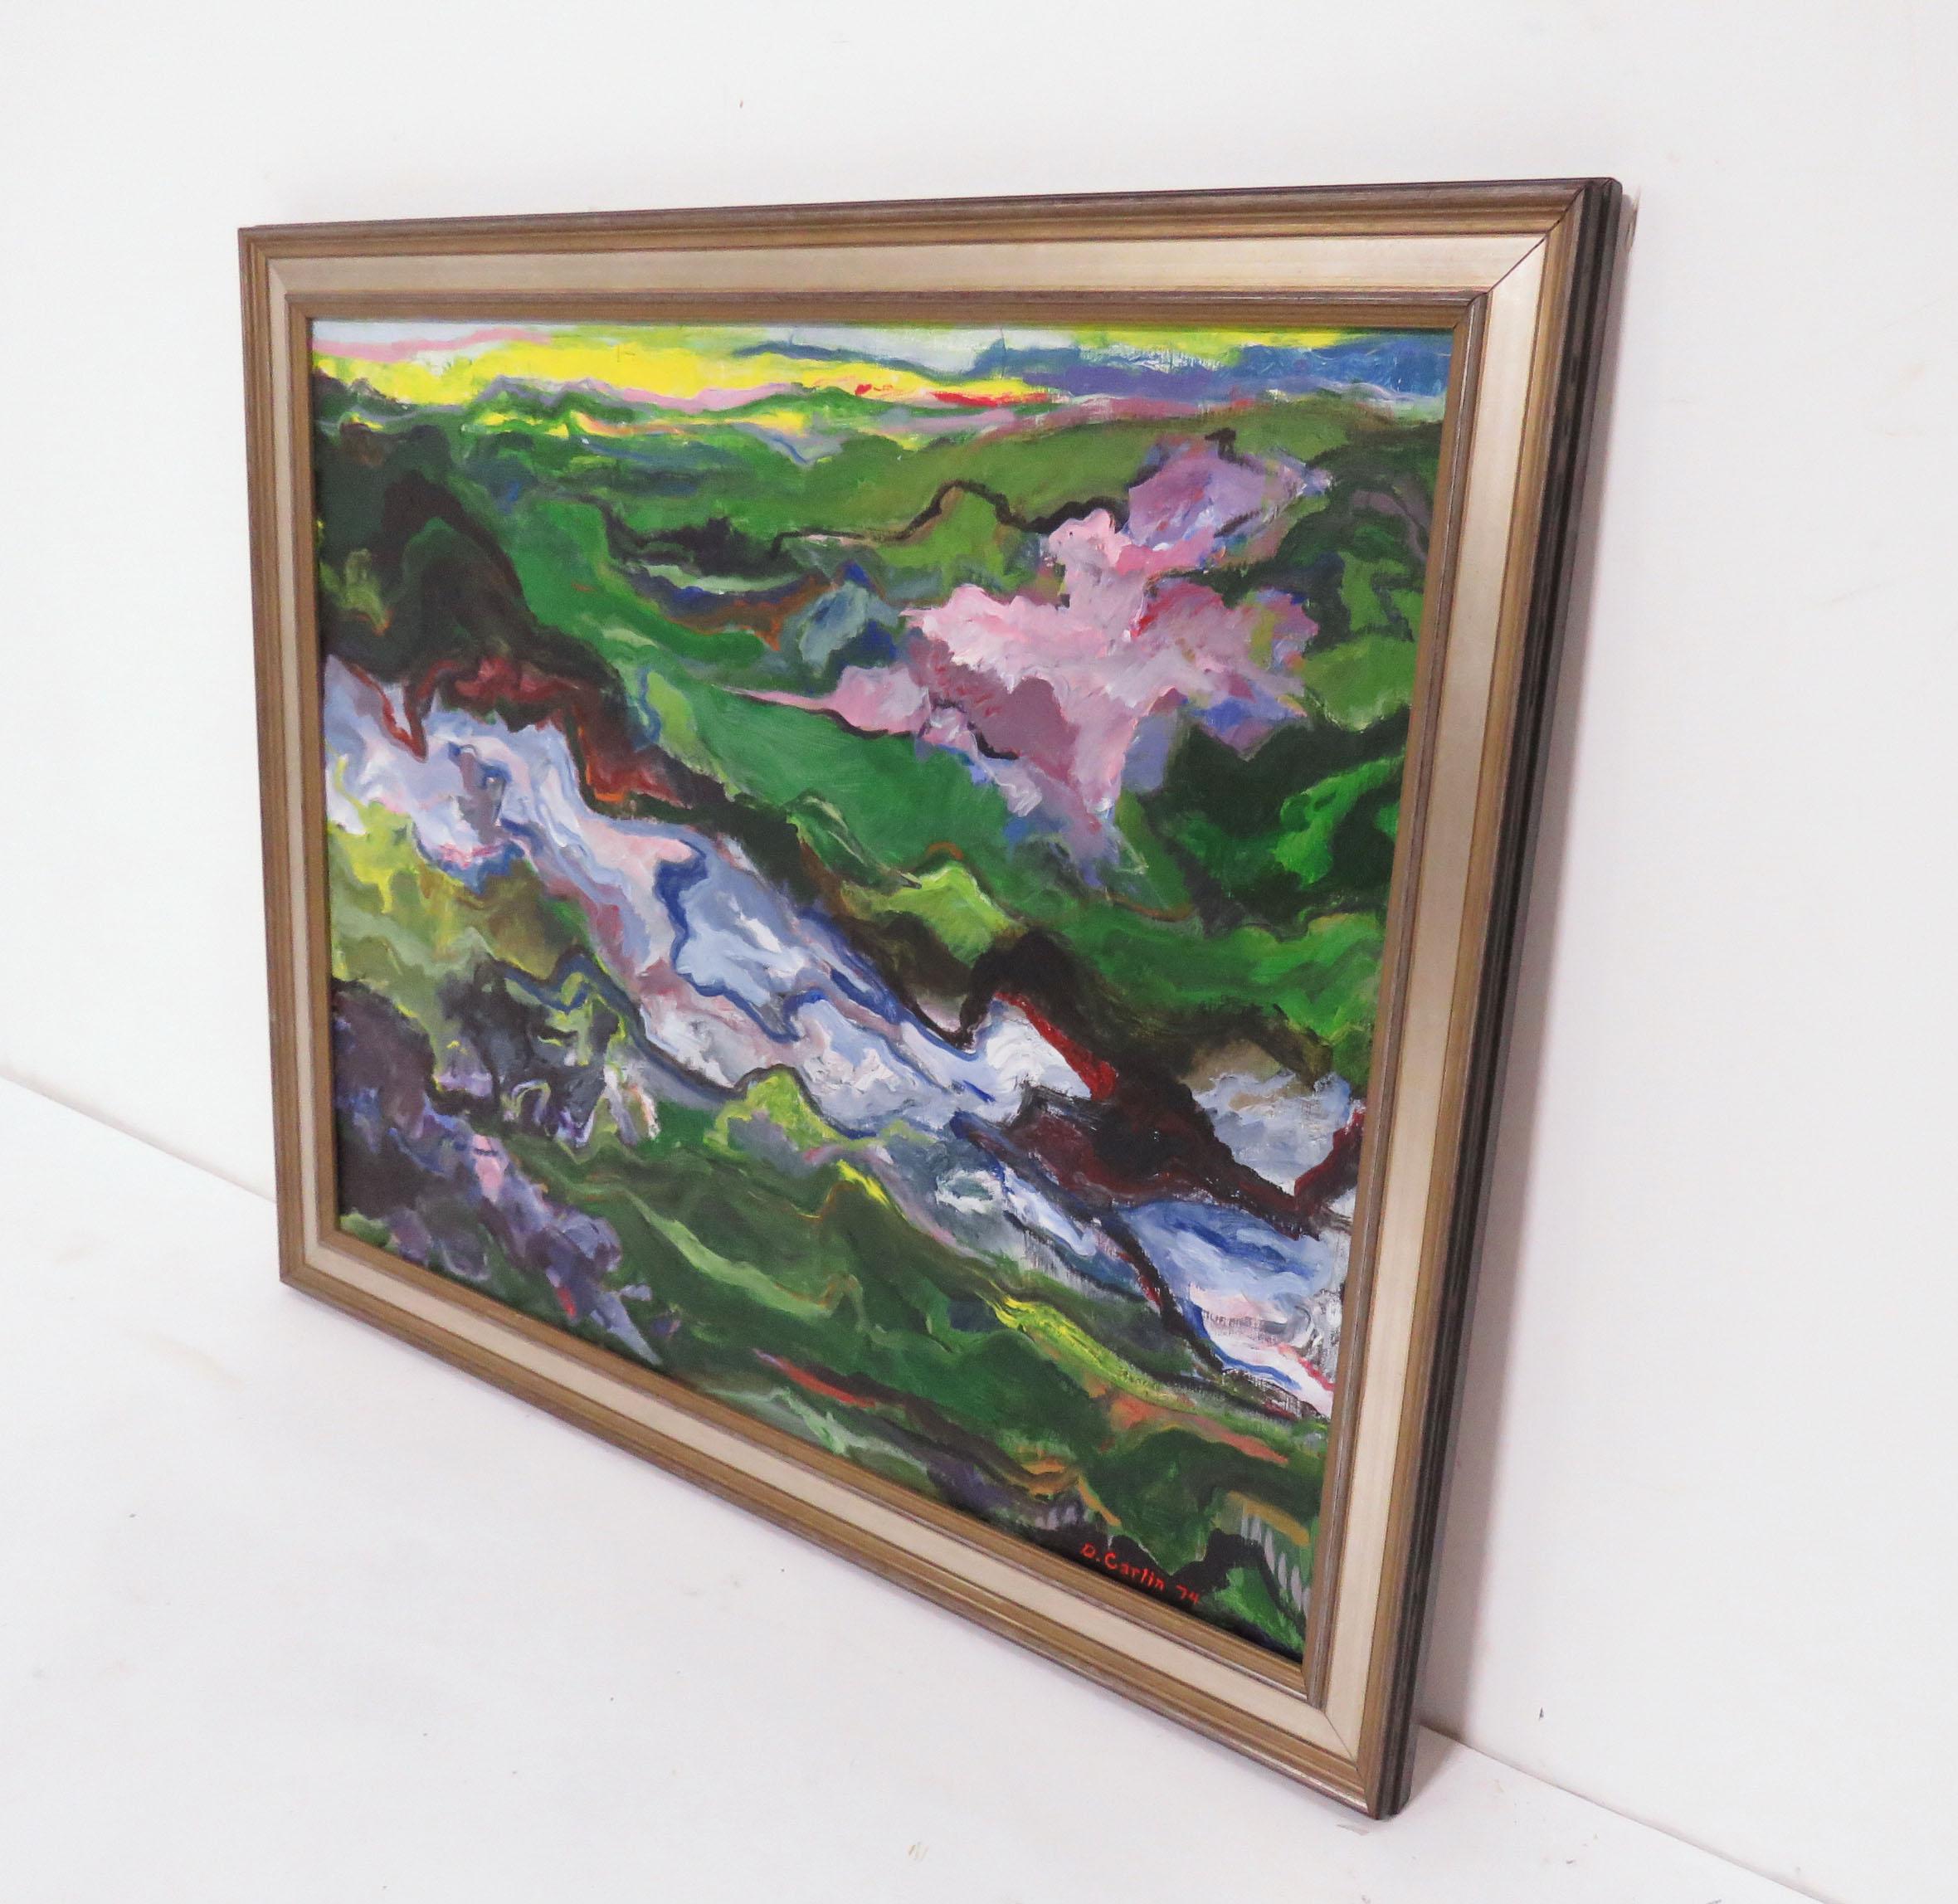 Modernist abstract landscape in the Fauvist manner, signed D. Carlin, dated 1974. Measures, as framed, measures: 33.75” x 27.5”.